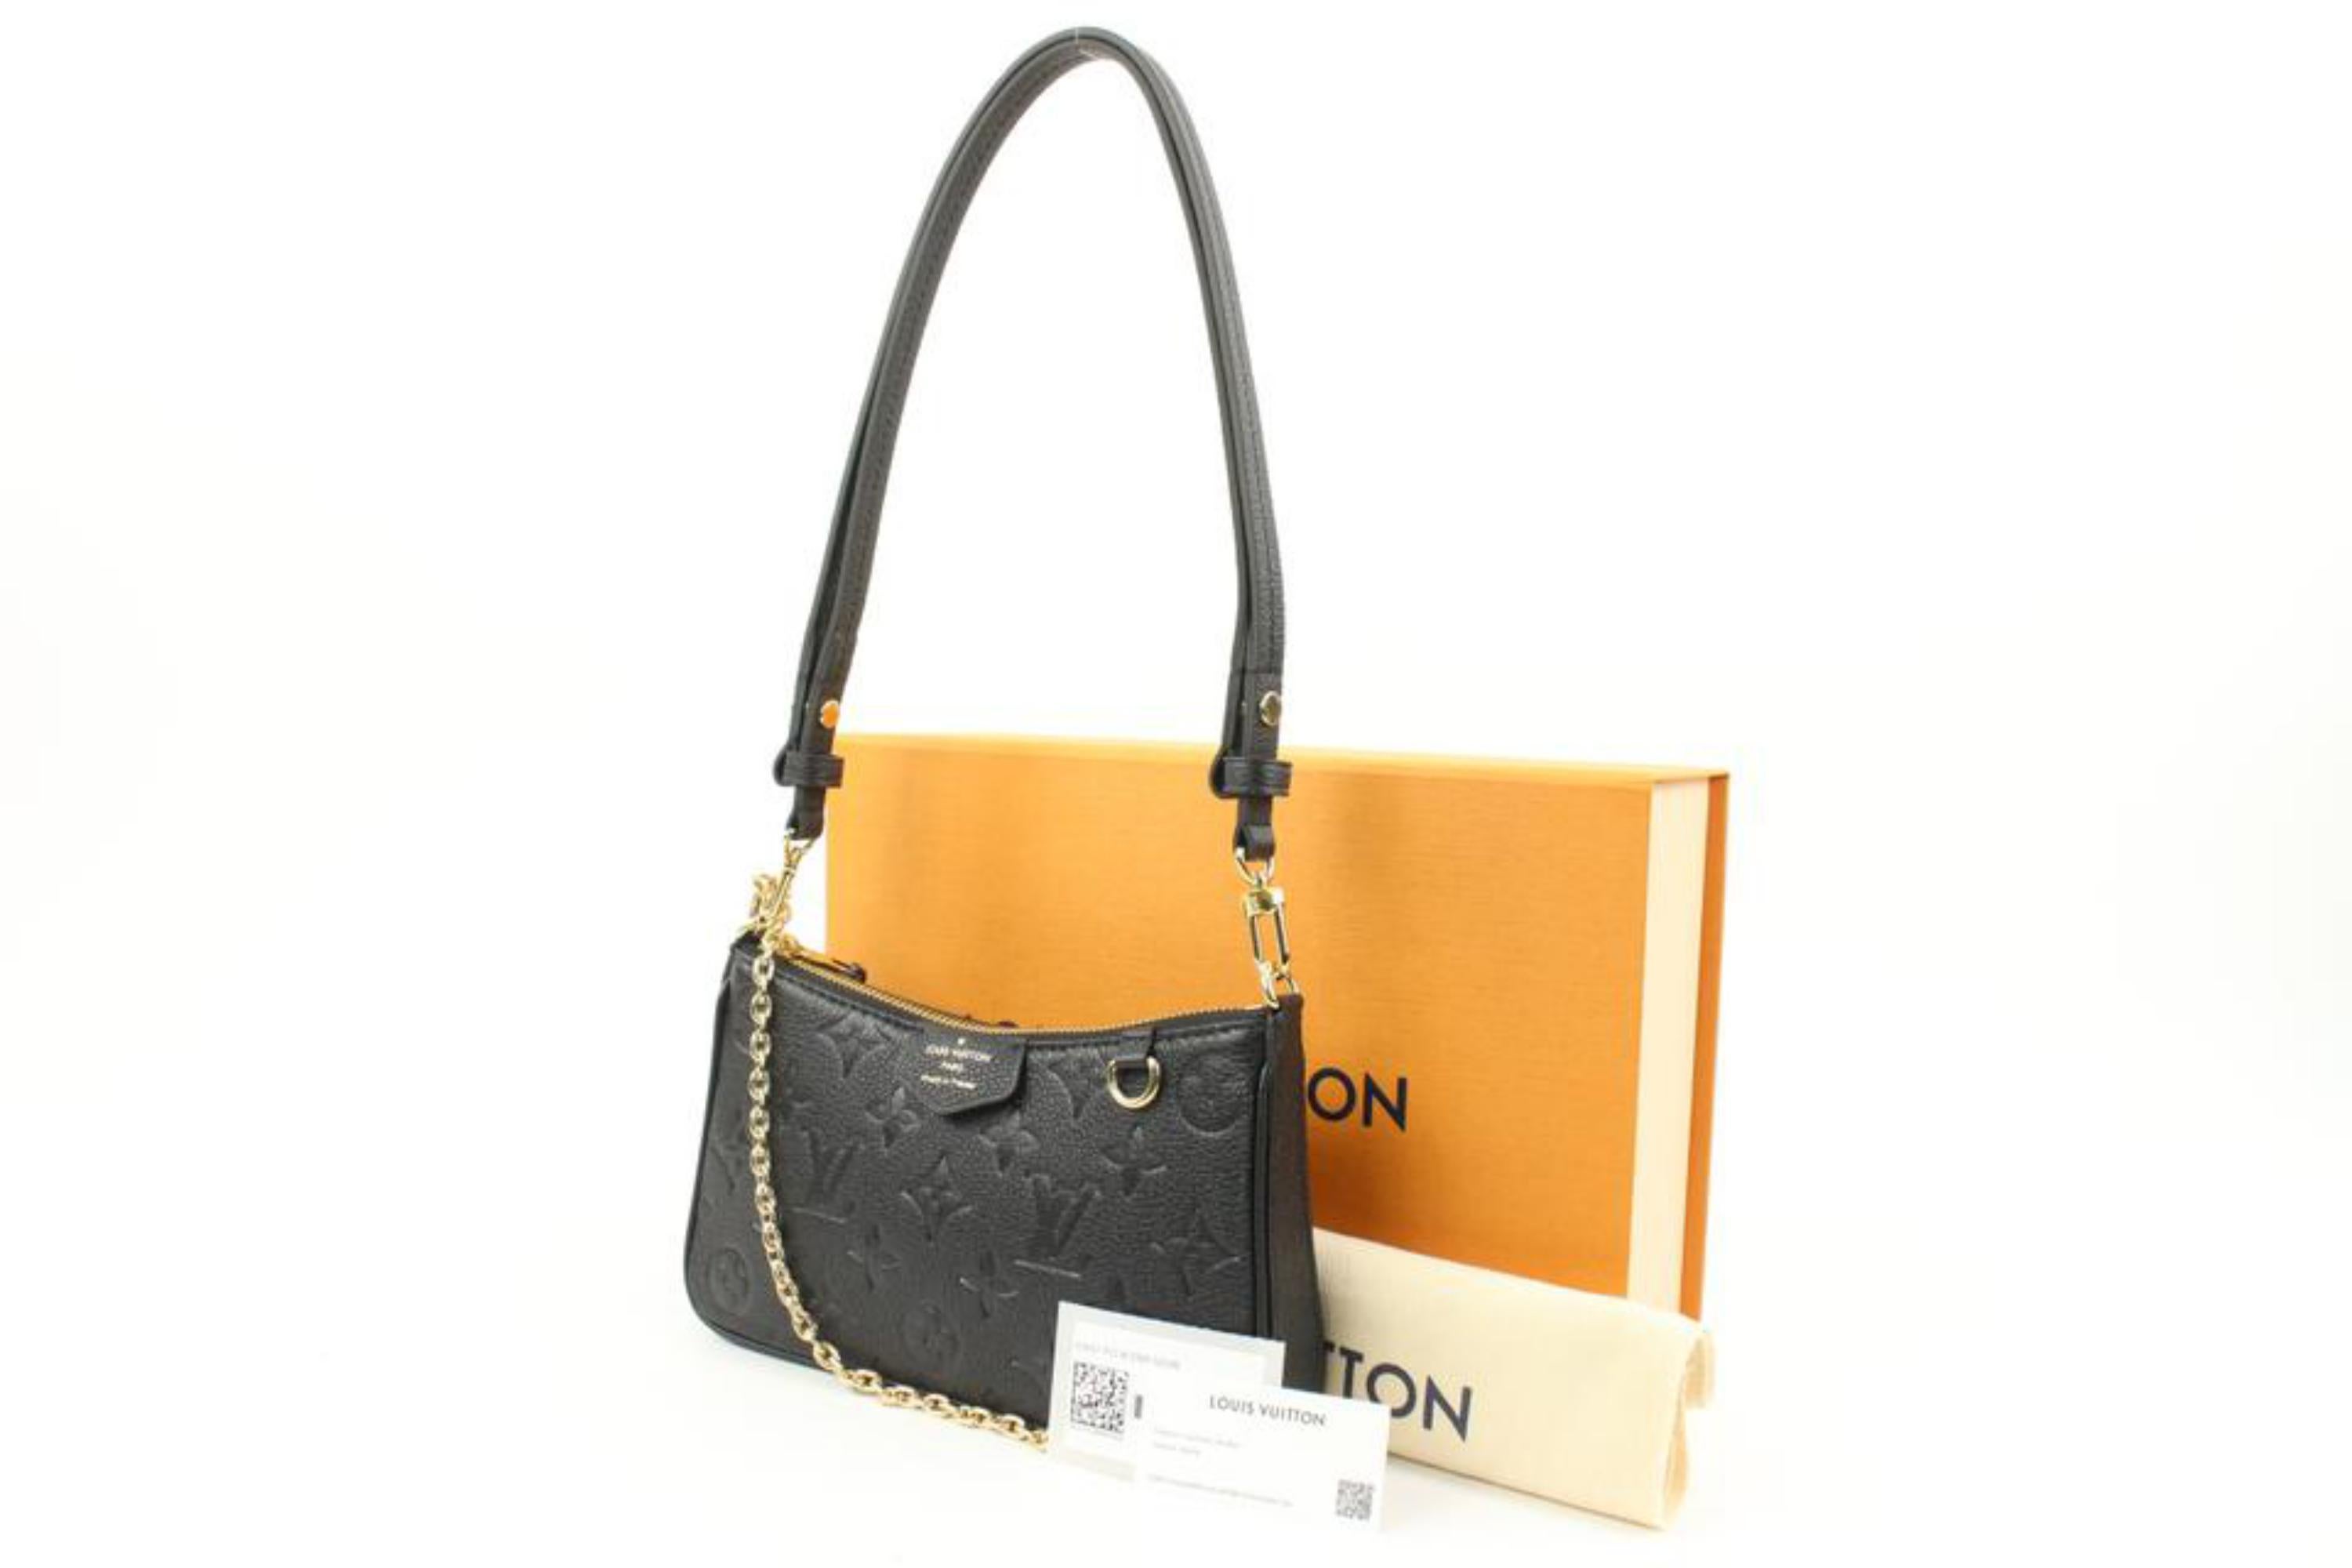 Louis Vuitton Black Monogram Leather Empreinte Easy Pouch on Strap Crossbody 120lv16
Date Code/Serial Number: Rfid Chip
Made In: France
Measurements: Length:  8